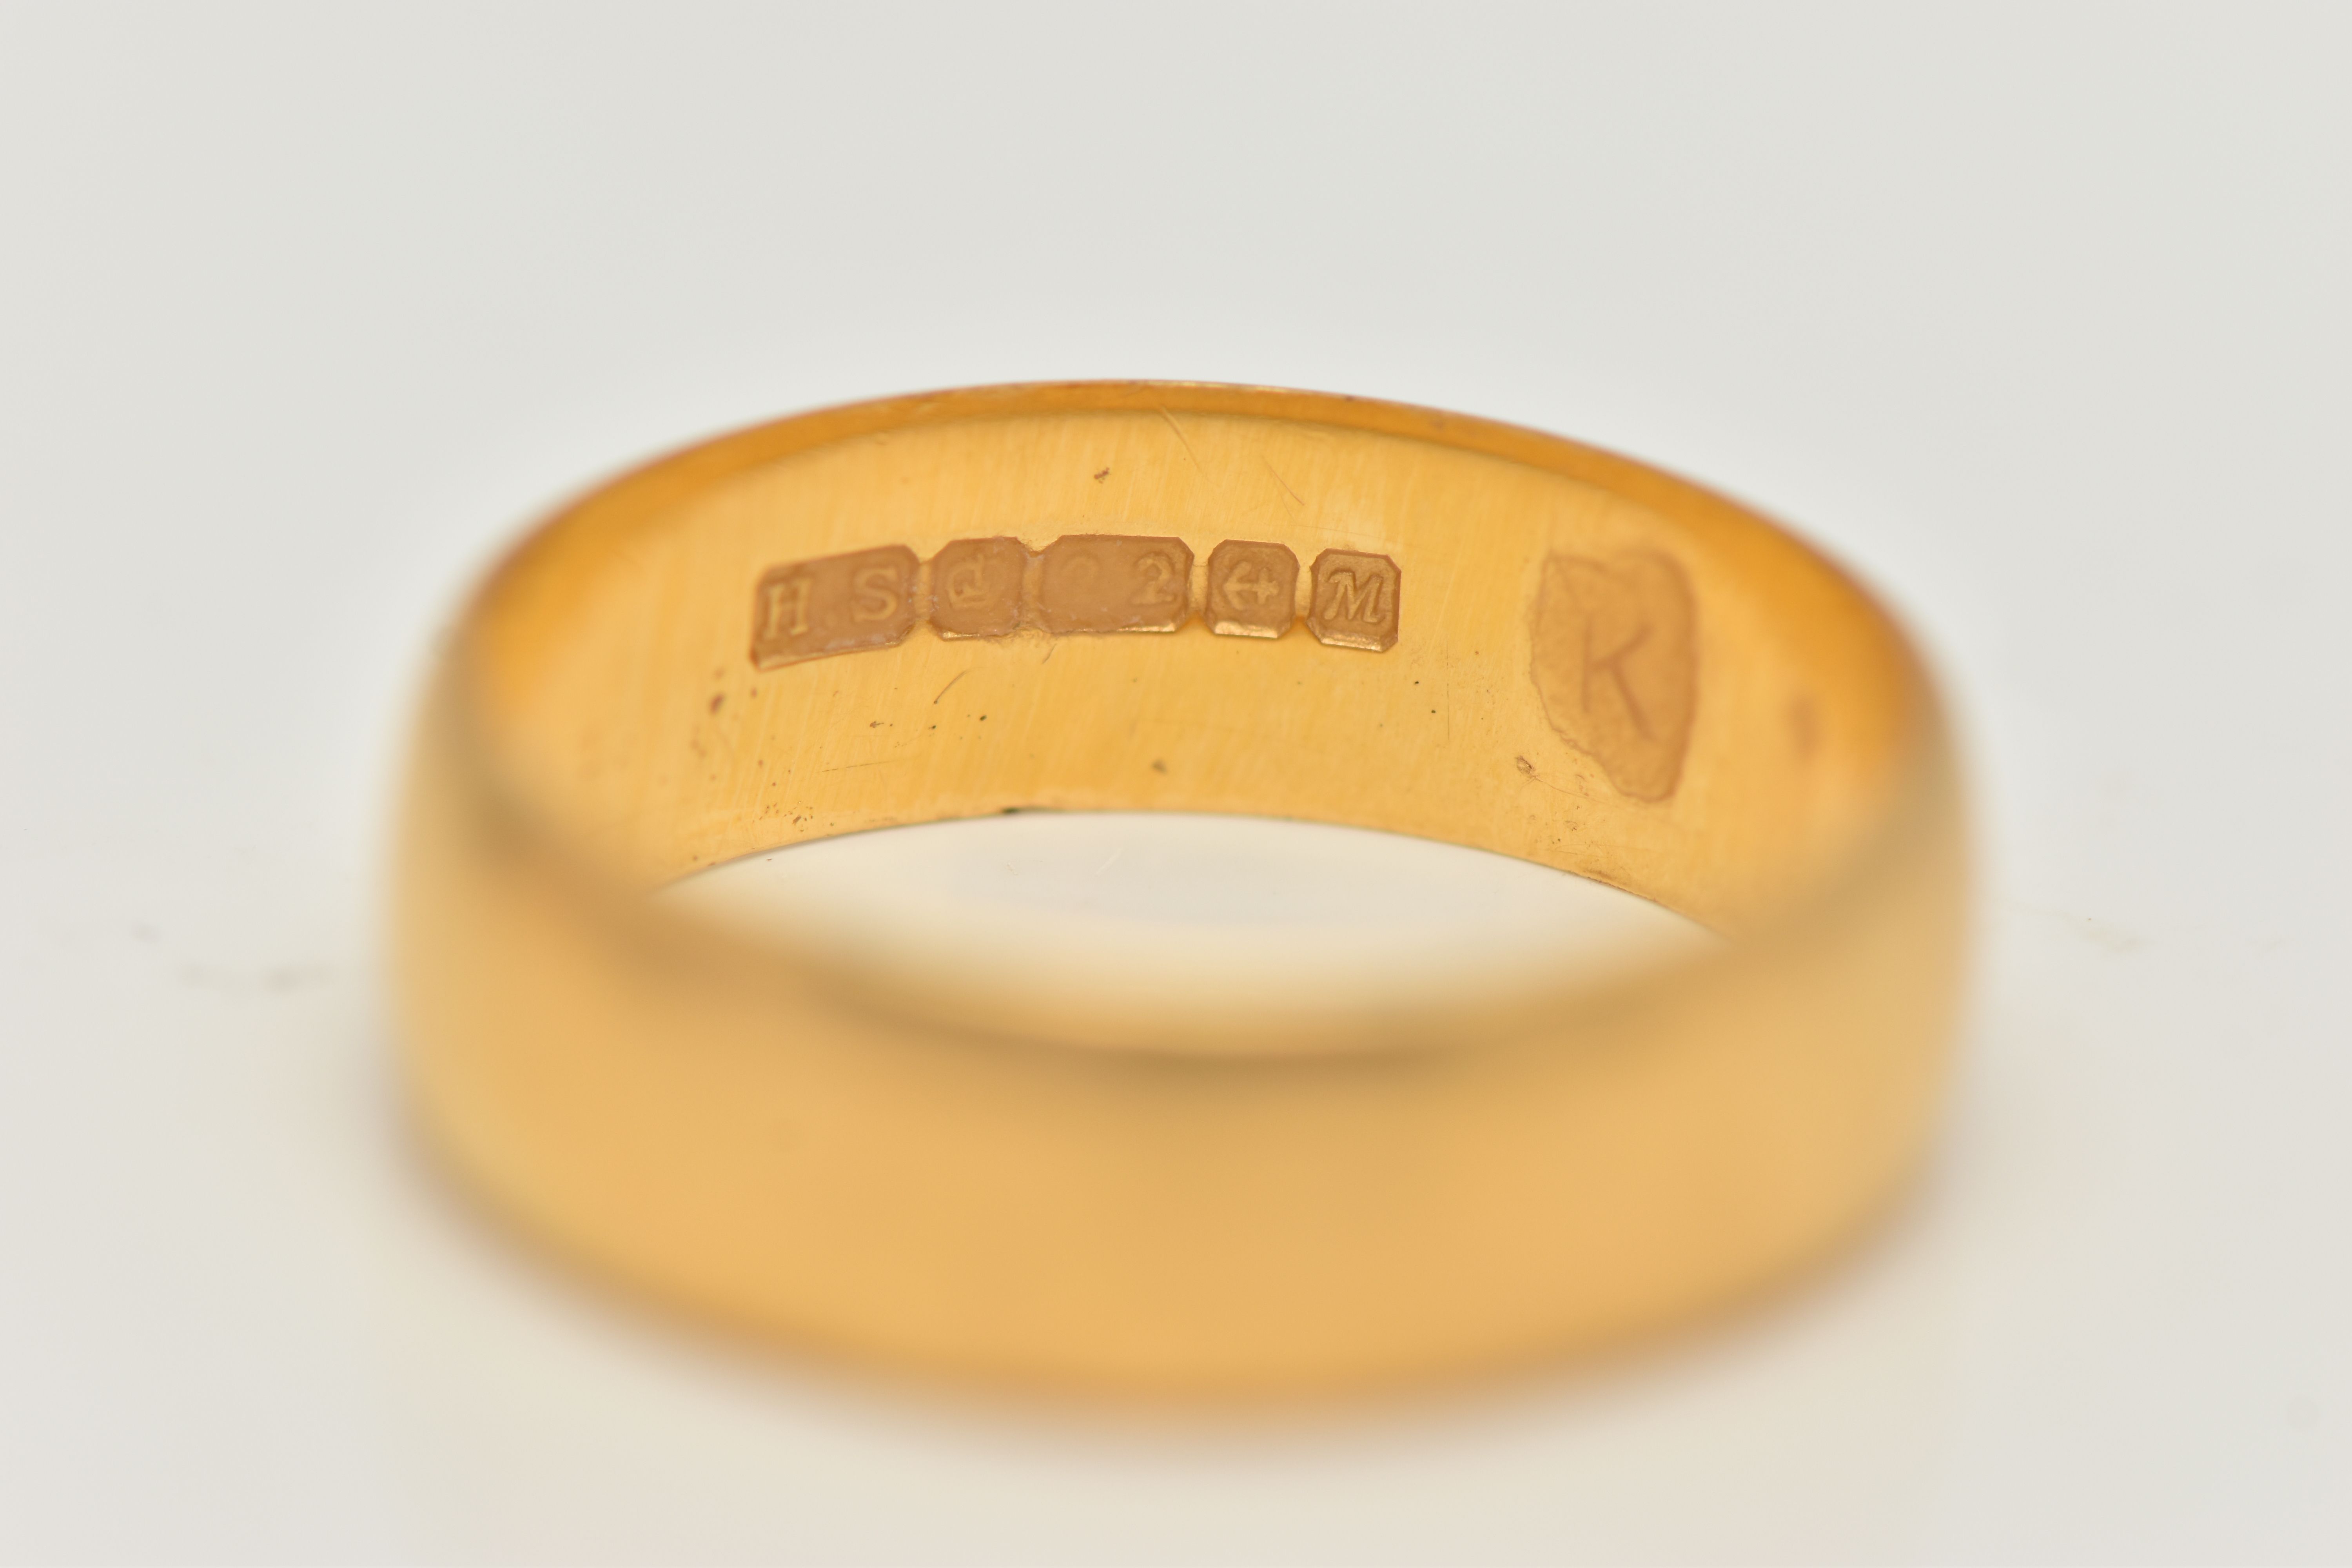 A 22CT YELLOW GOLD POLISHED BAND, wide band, approximate band width 5.4mm, hallmarked 22ct - Image 2 of 2